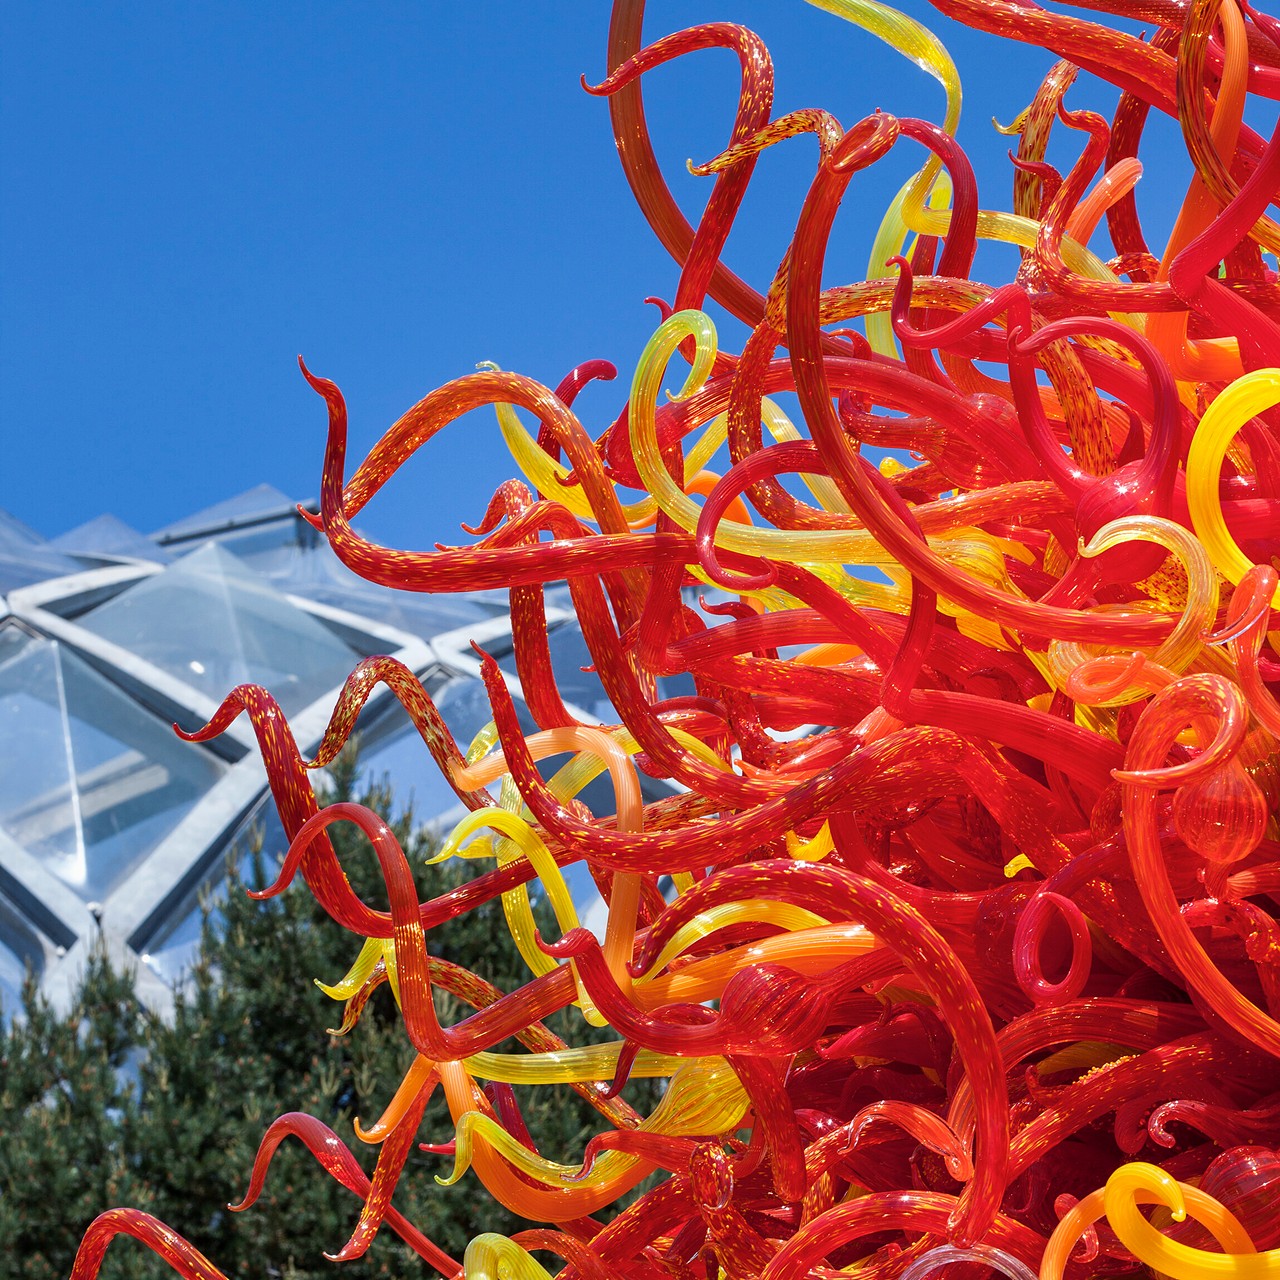 Missouri Botanical Garden To Host New Dale Chihuly Glass Sculptures ...